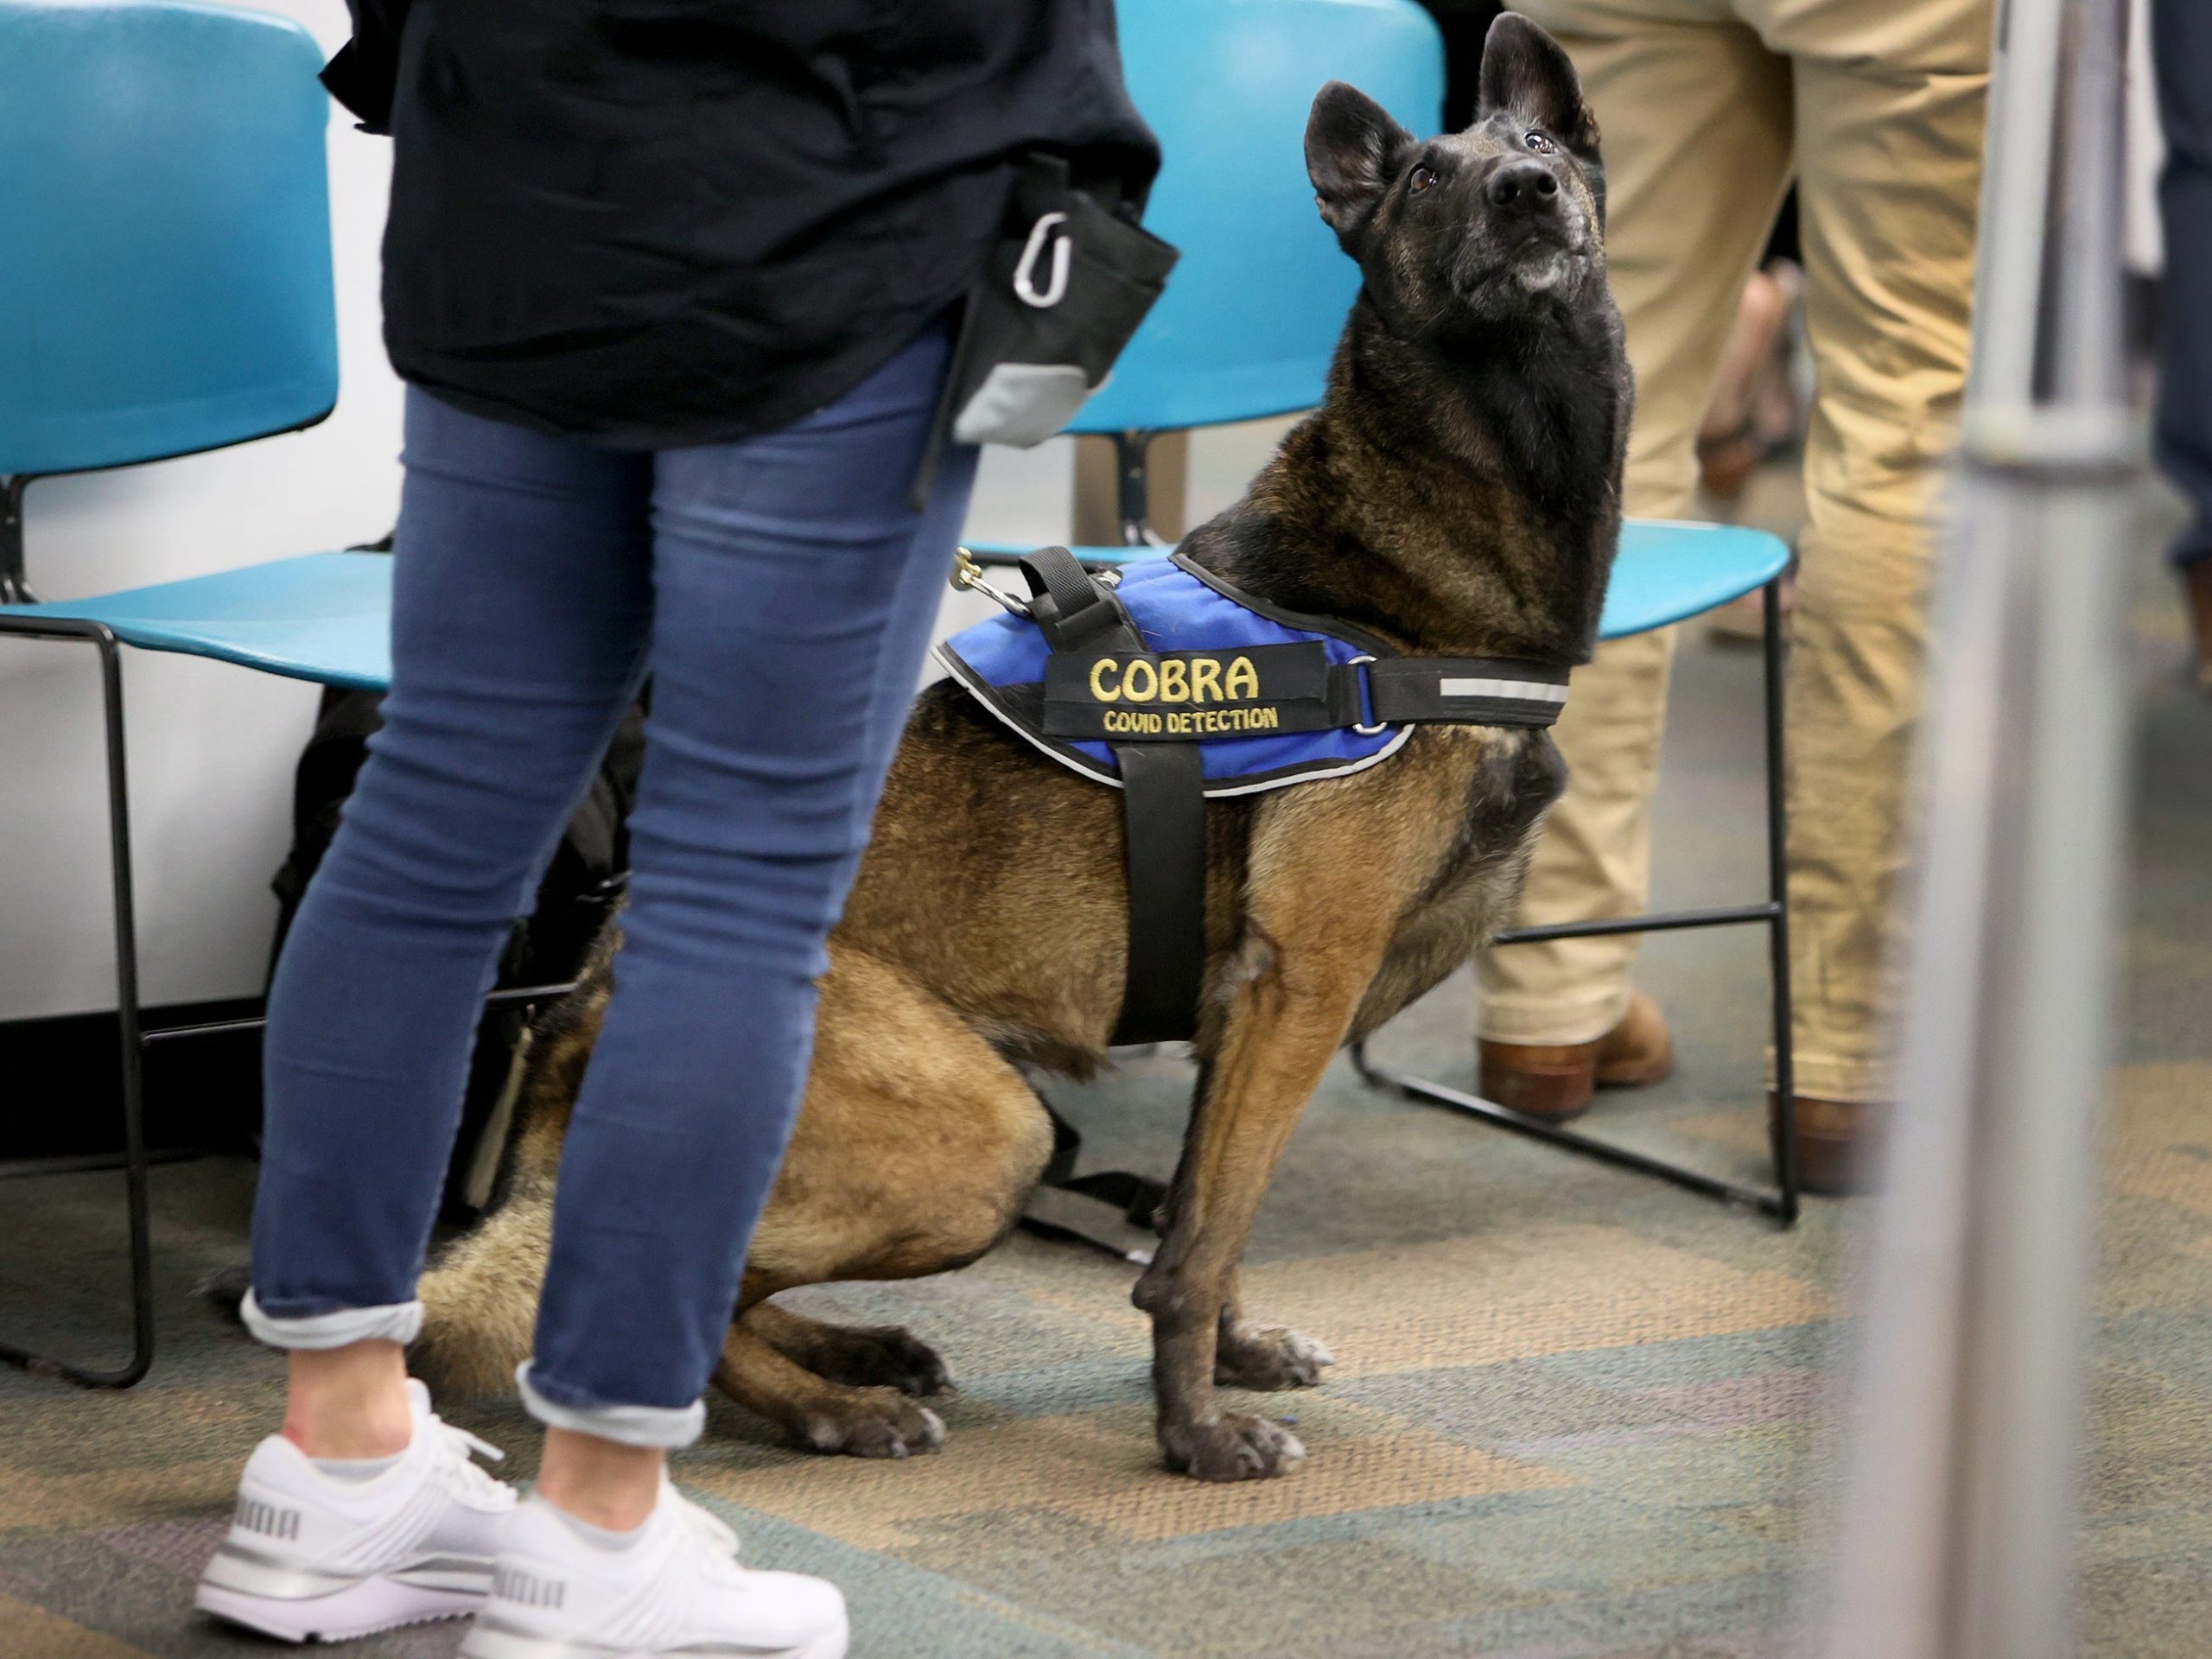 Cobra, a Belgian Malinois, waits for a command from Denise Webb before sniffing masks for the scent of COVID-19 at Miami International Airport on September 08, 2021 in Miami, Florida.